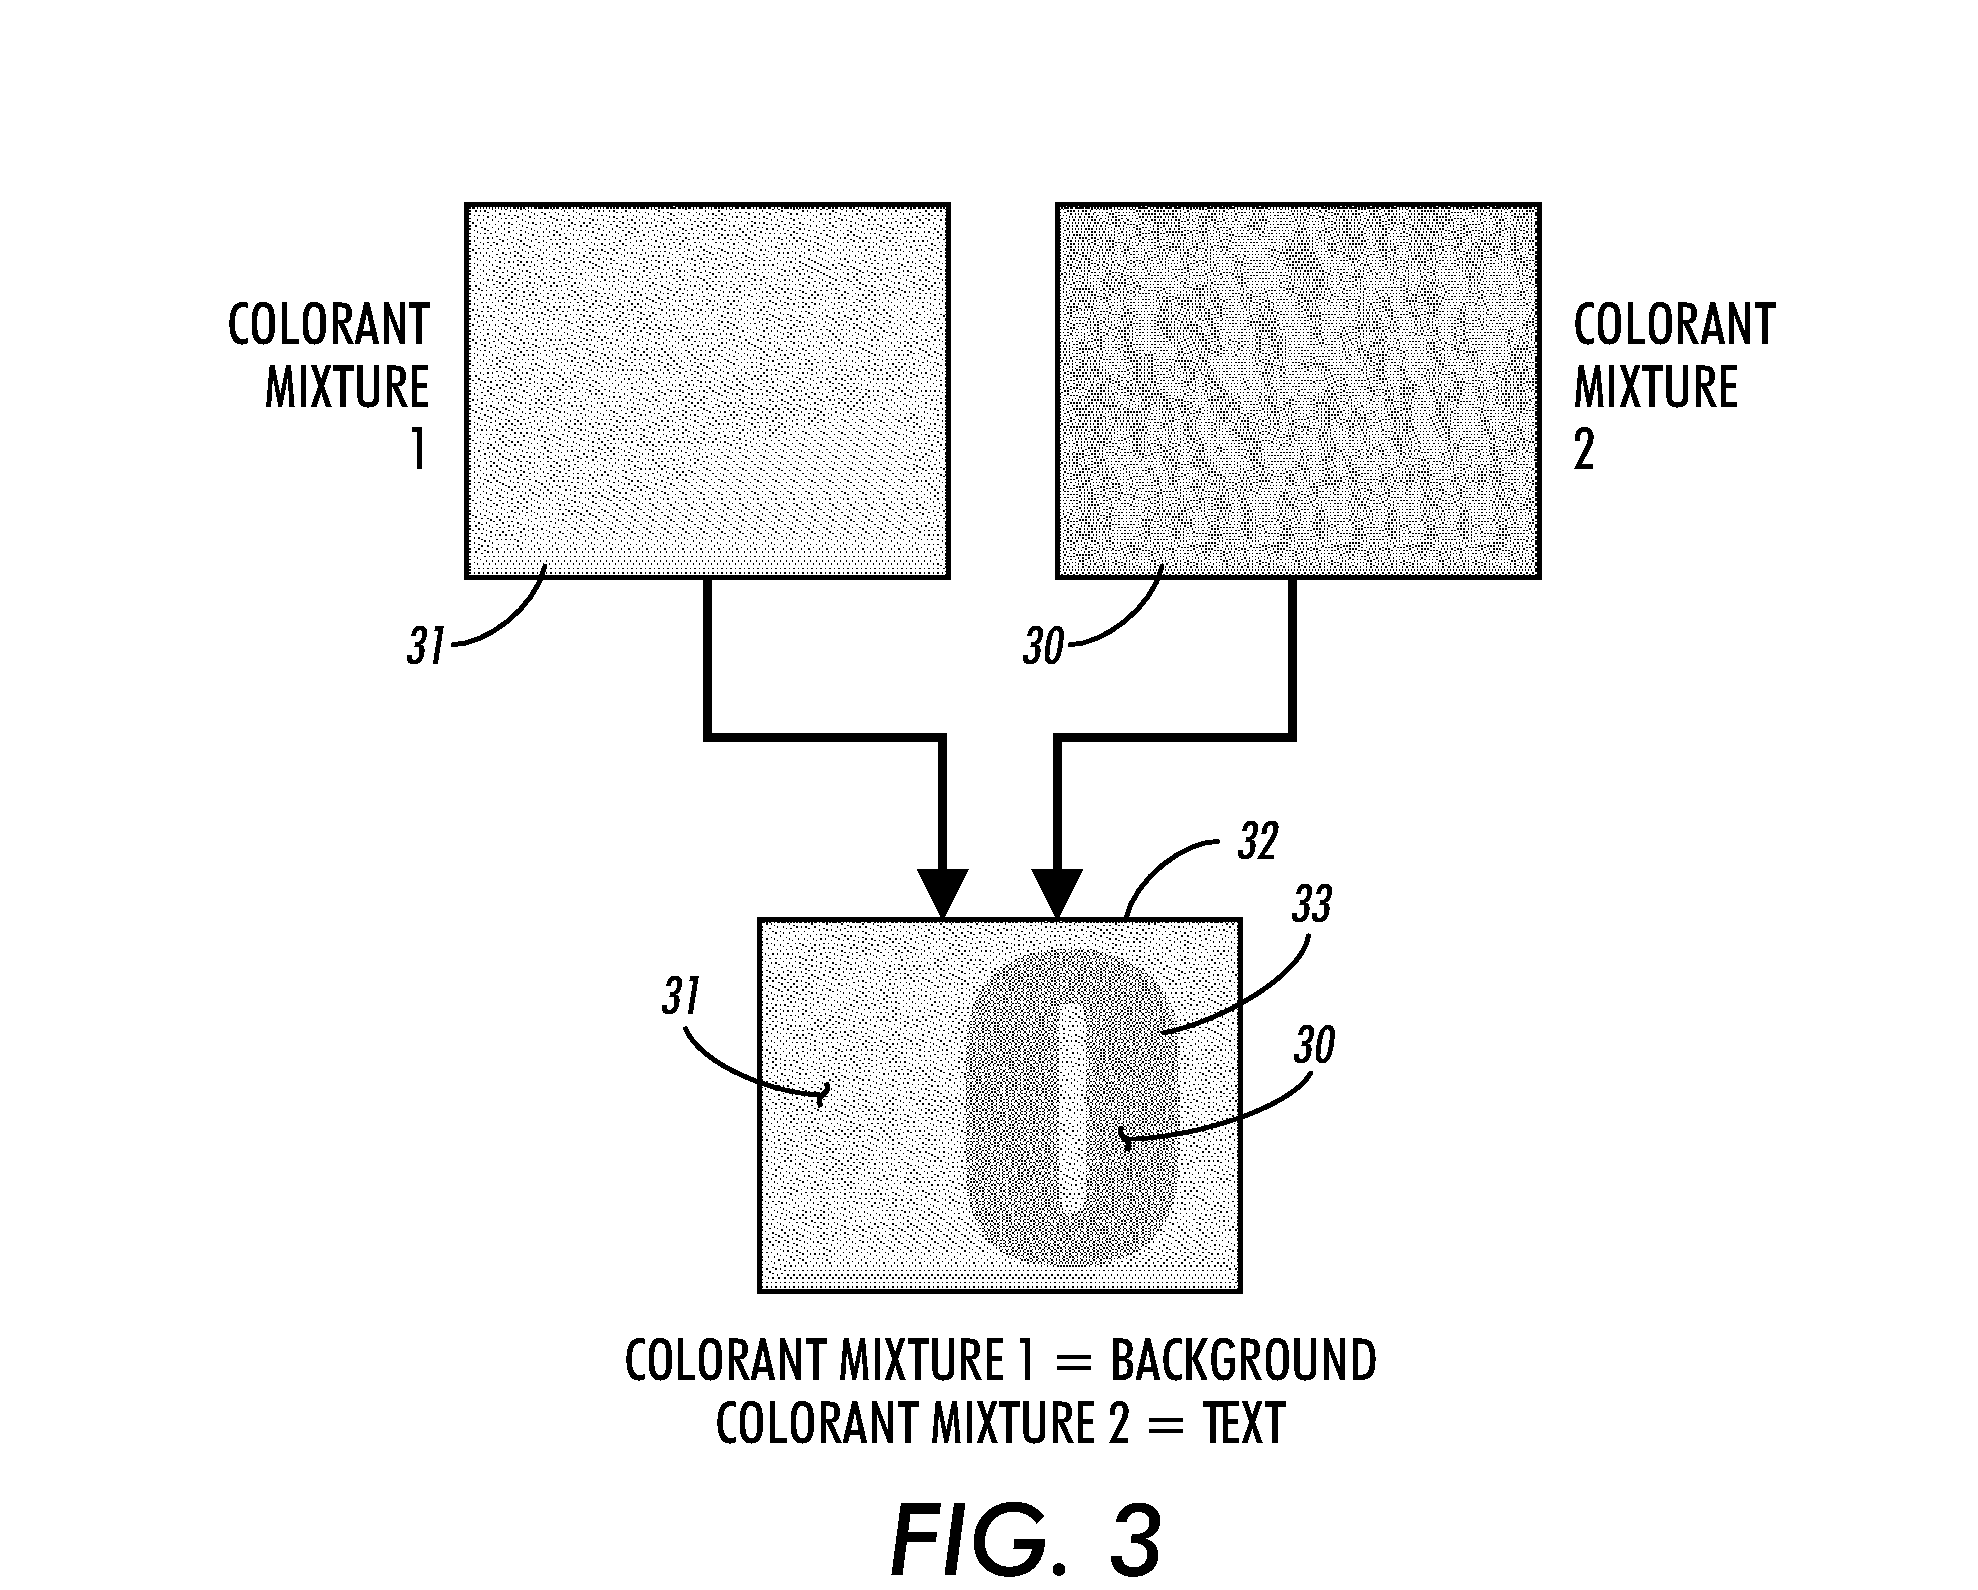 Substrate fluorescent non-overlapping dot patterns for embedding information in printed documents